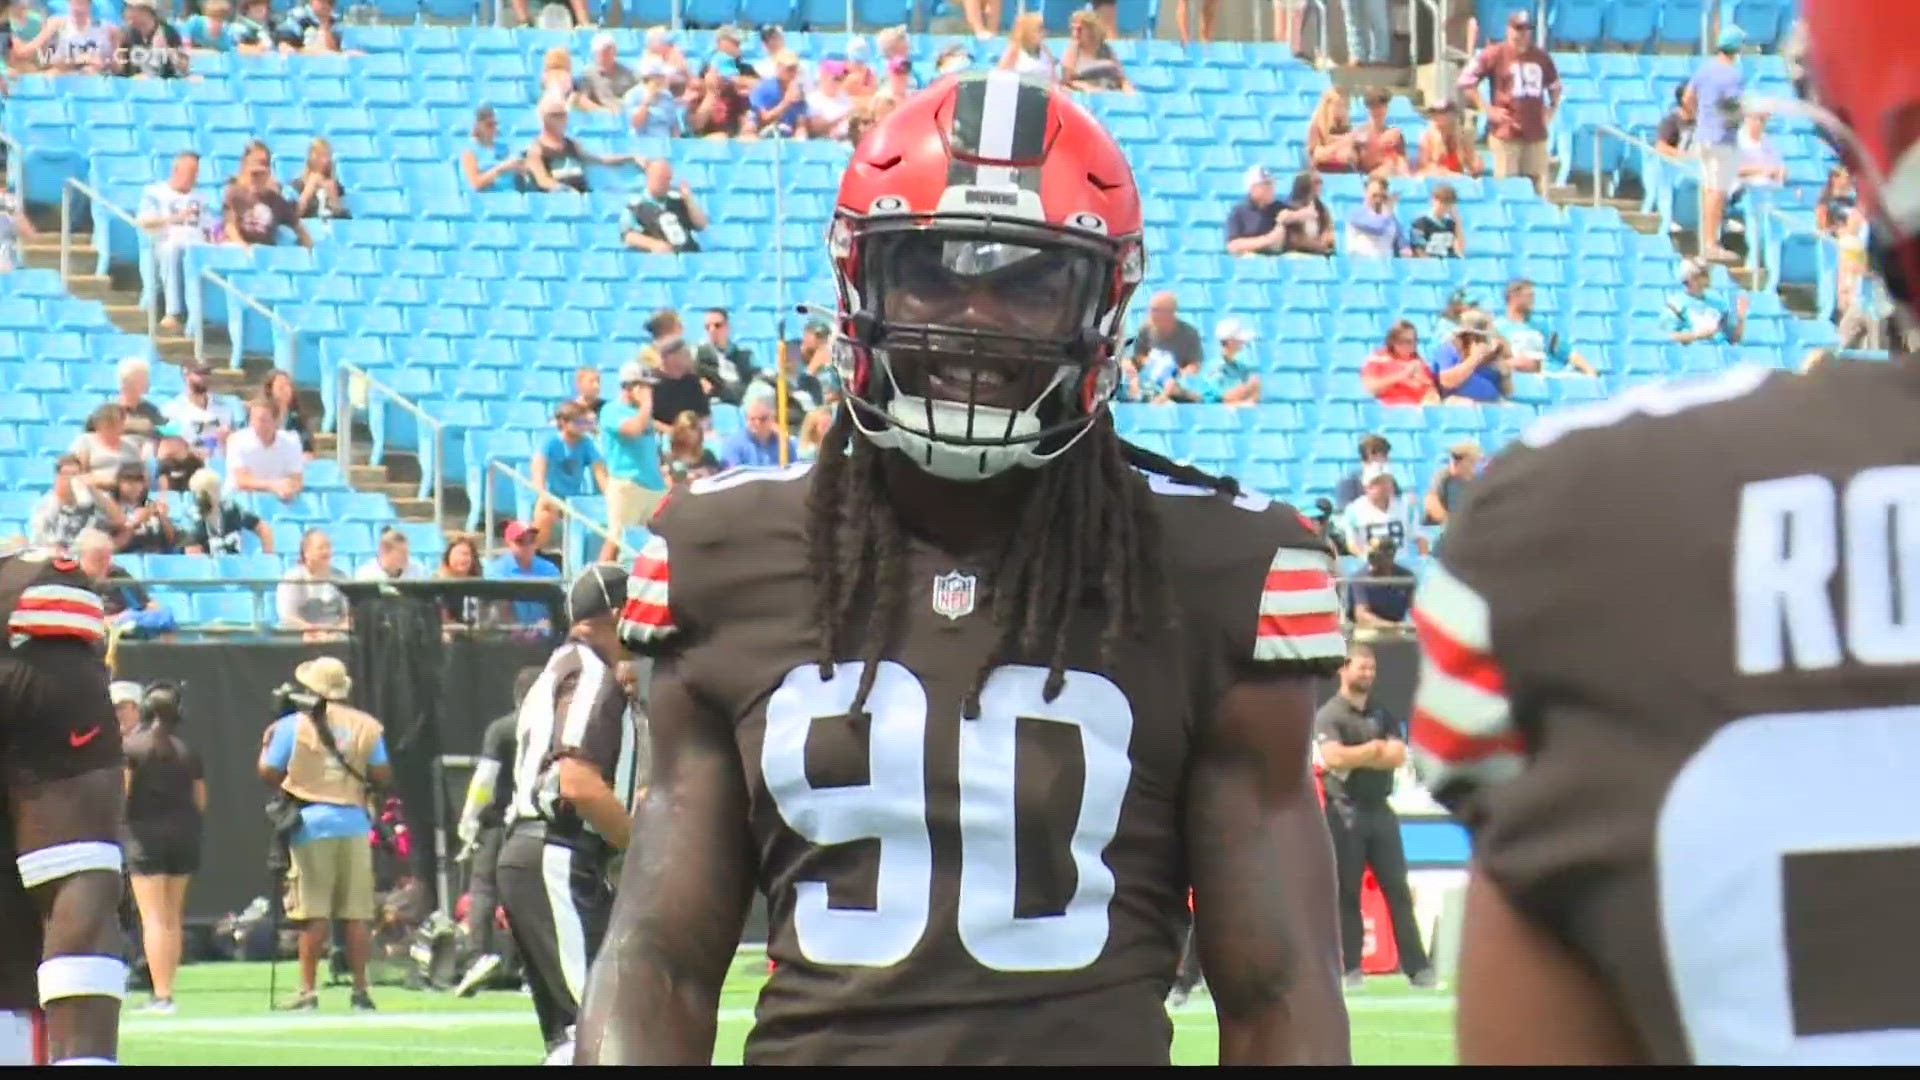 Jadeveon Clowney signed a contract with the Panthers on Wednesday, according to the team.